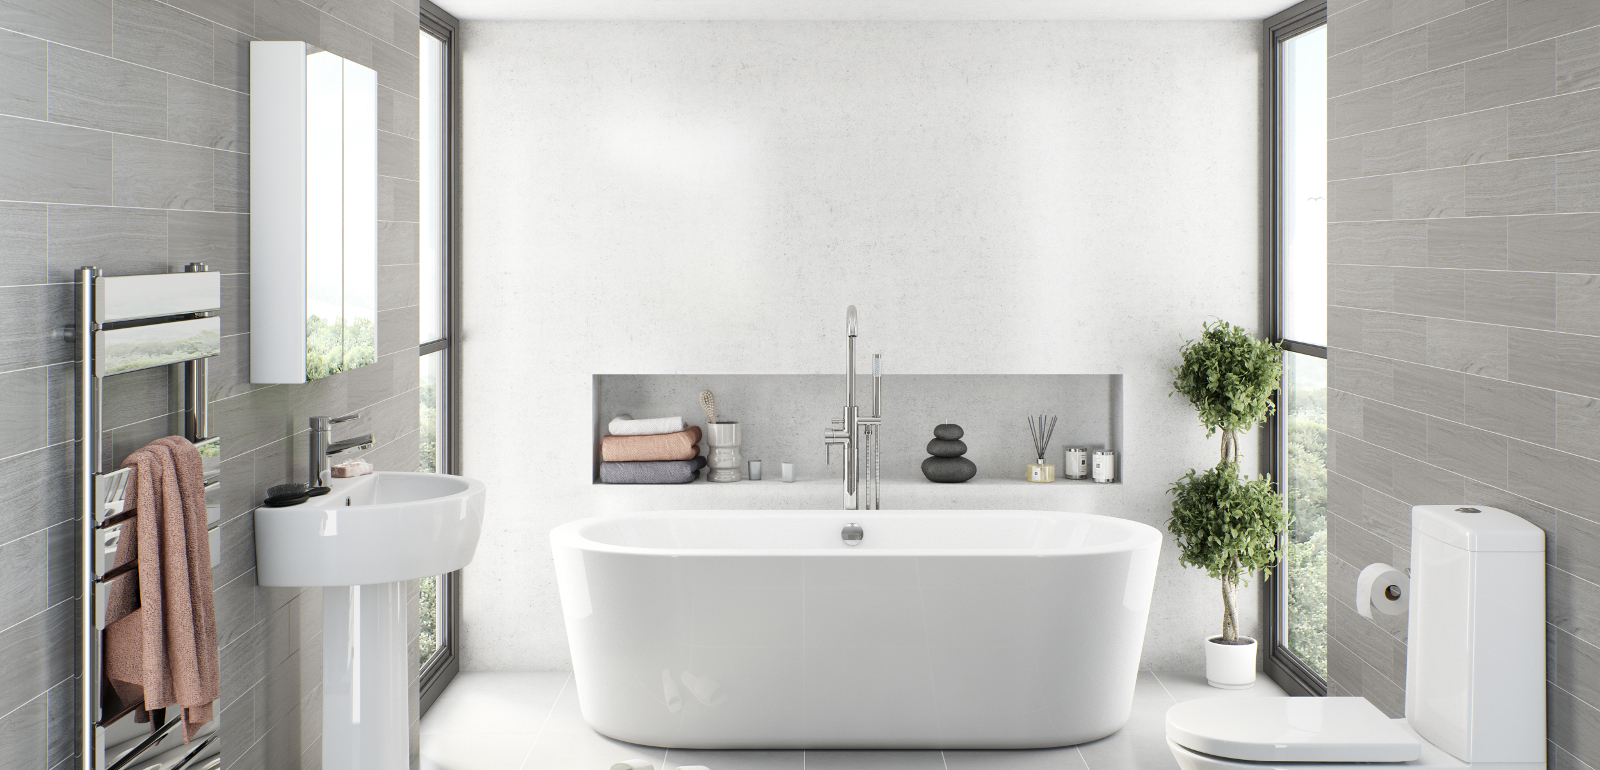 fitted bathrooms how much should you pay to have a bathroom fitted? PAXLRCZ